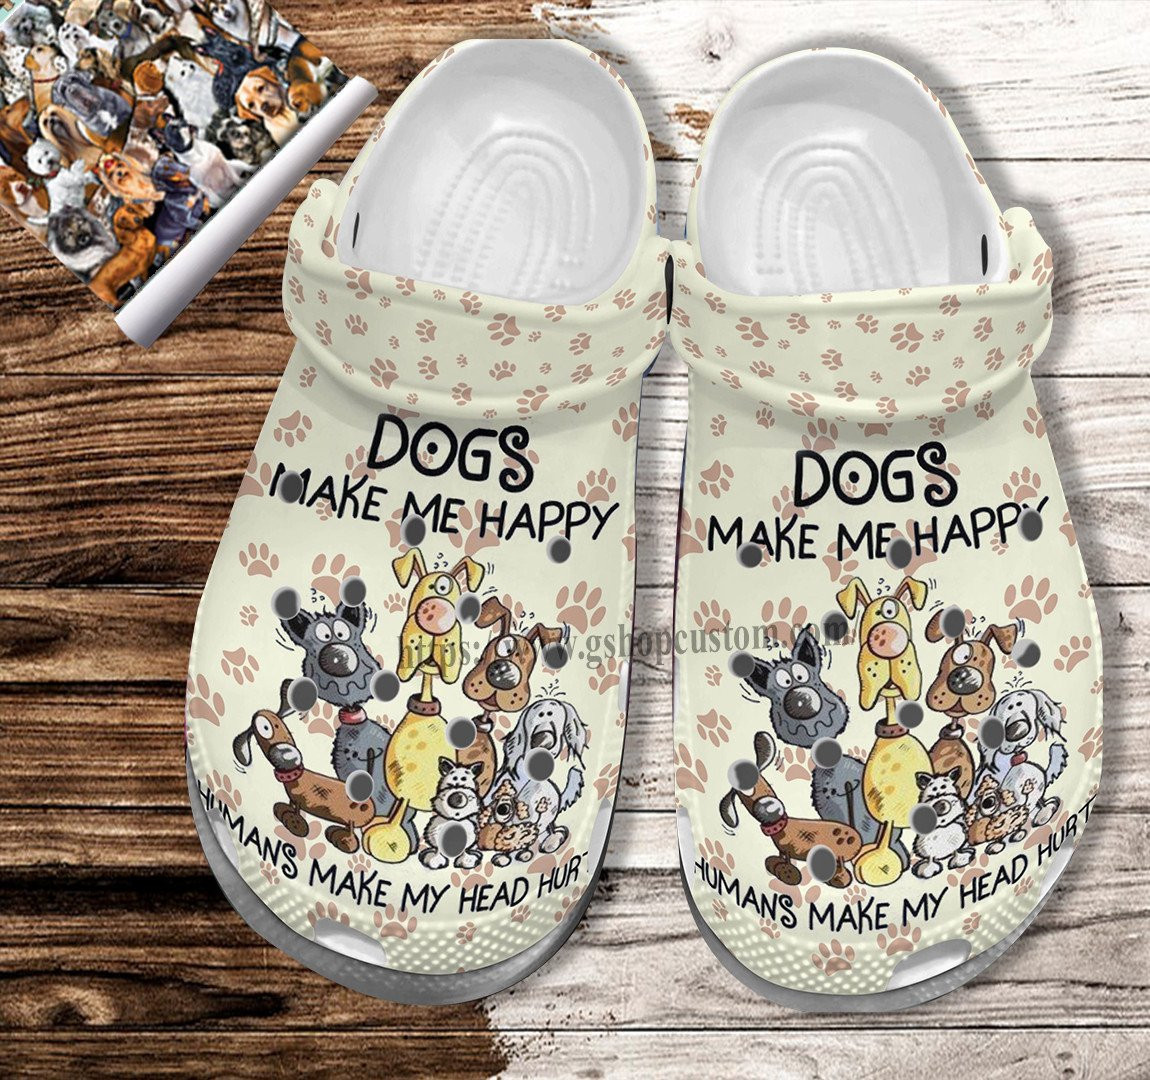 Dog Make Me Happy Crocs Shoes Gift Mother Day - Human Make My Head Hurt Shoes Croc Clogs Gift Boy Girl